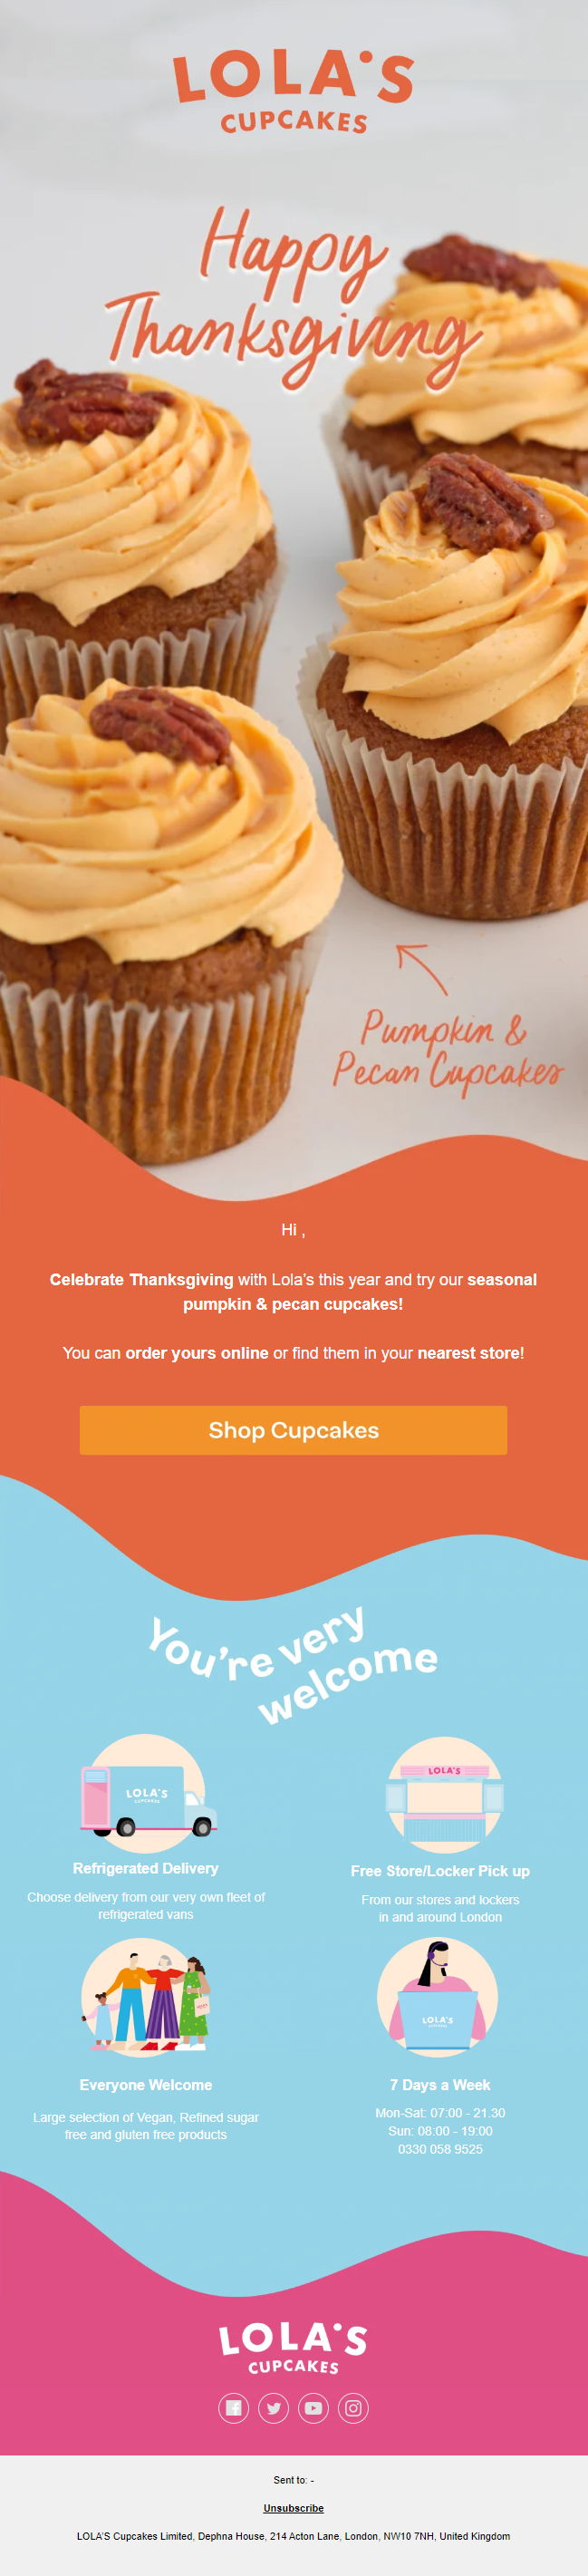 Thanksgiving email from Lola's Cupcakes